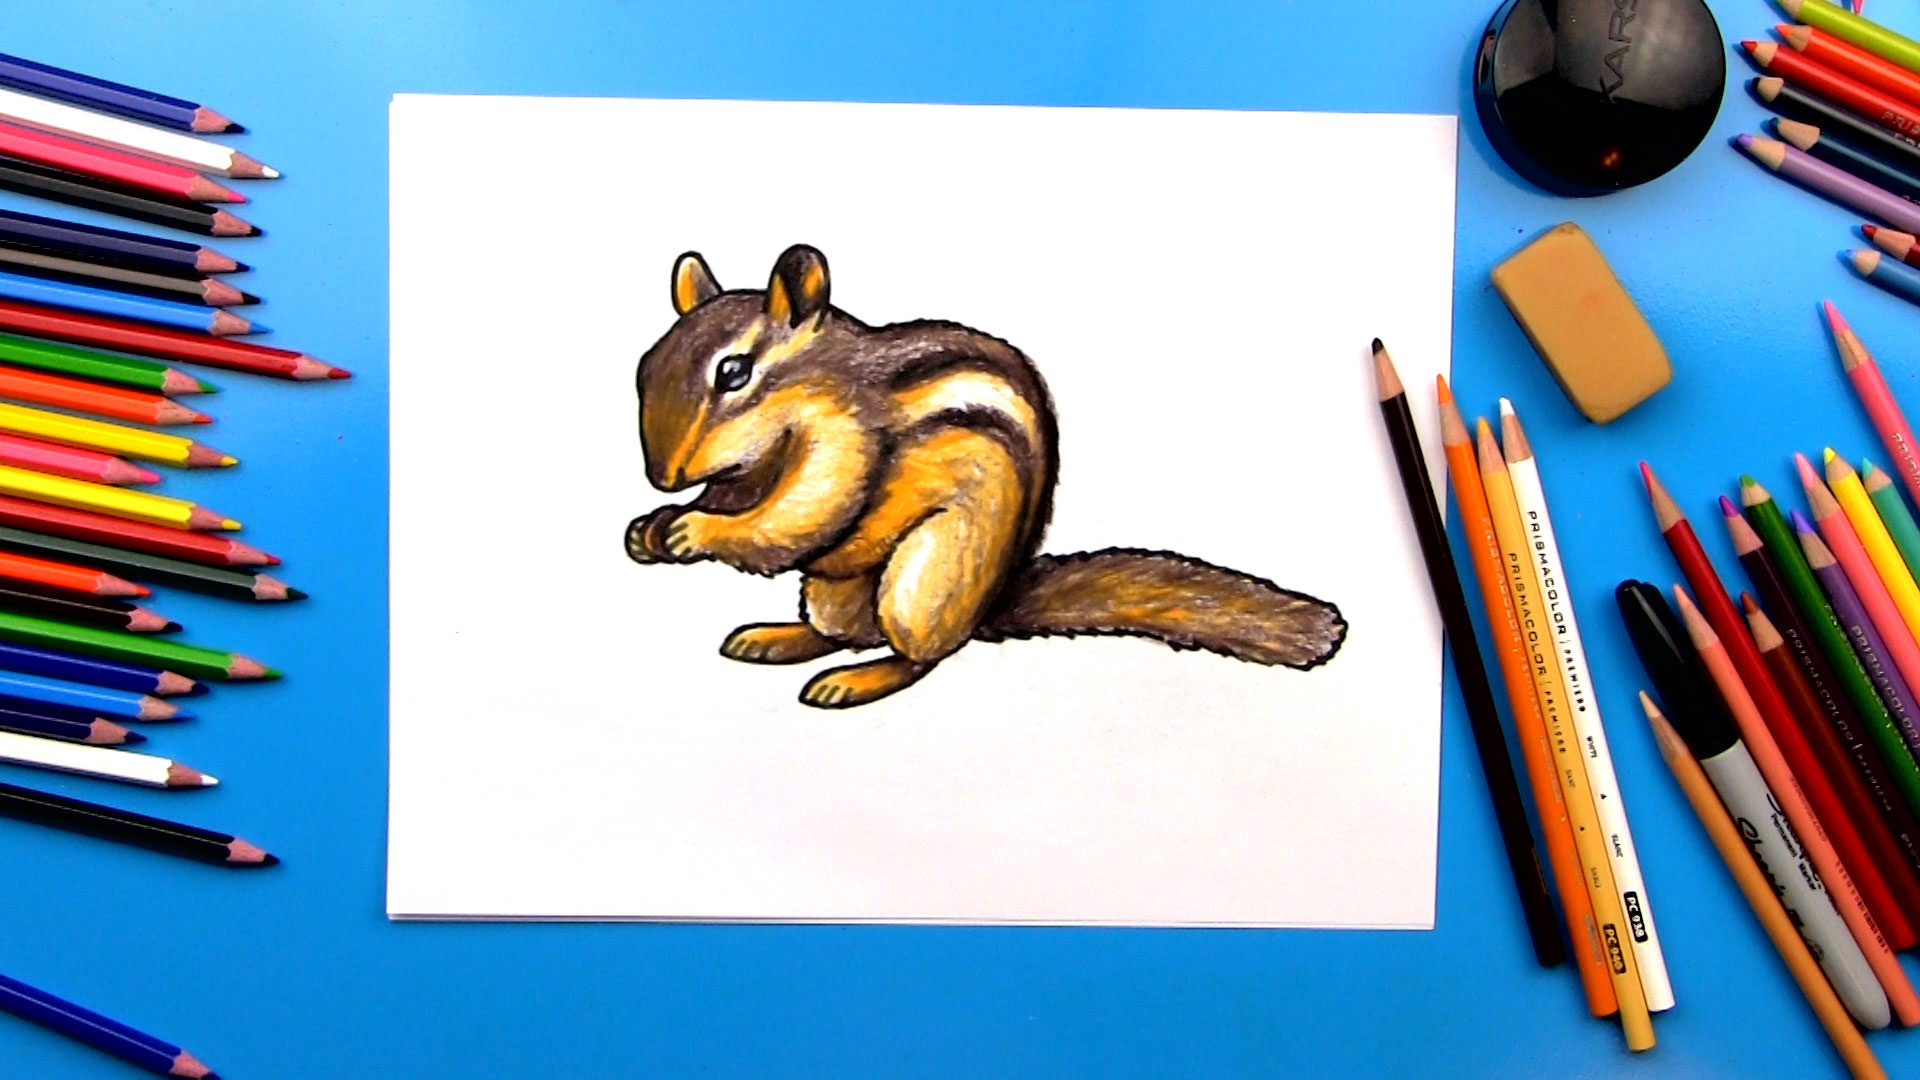 How To Draw A Realistic Chipmunk - Art For Kids Hub